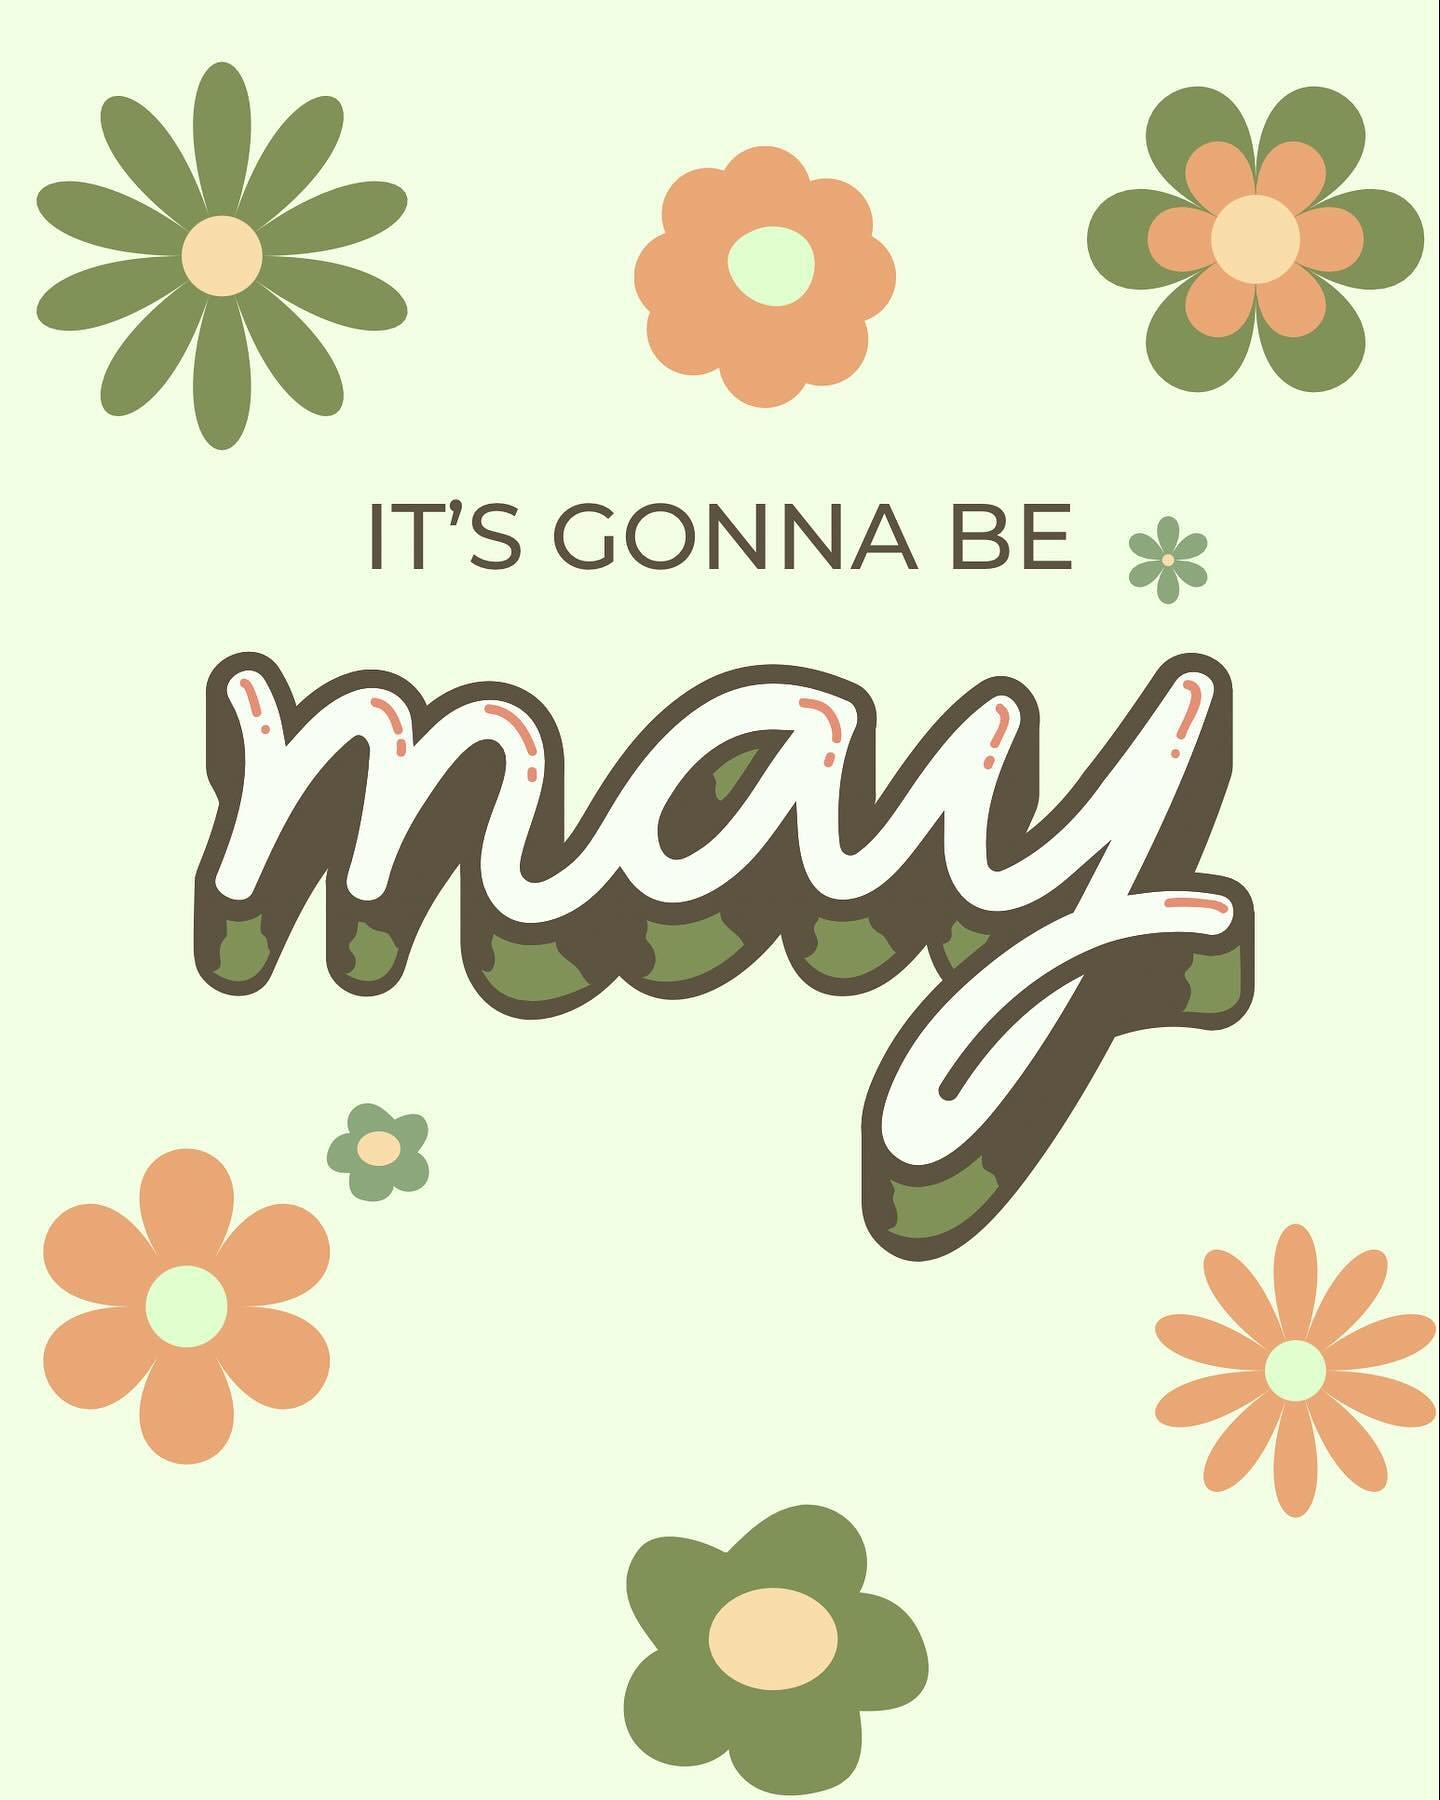 Happy May everyone 🪴

🍄 We are excited to drop TWO new drinks for the month PLUS three more *one day only* drinks to celebrate all the Star Wars fans + Moms out there! Those drink menus will be separate posts coming out S O O N!

🍄 Granny Square W